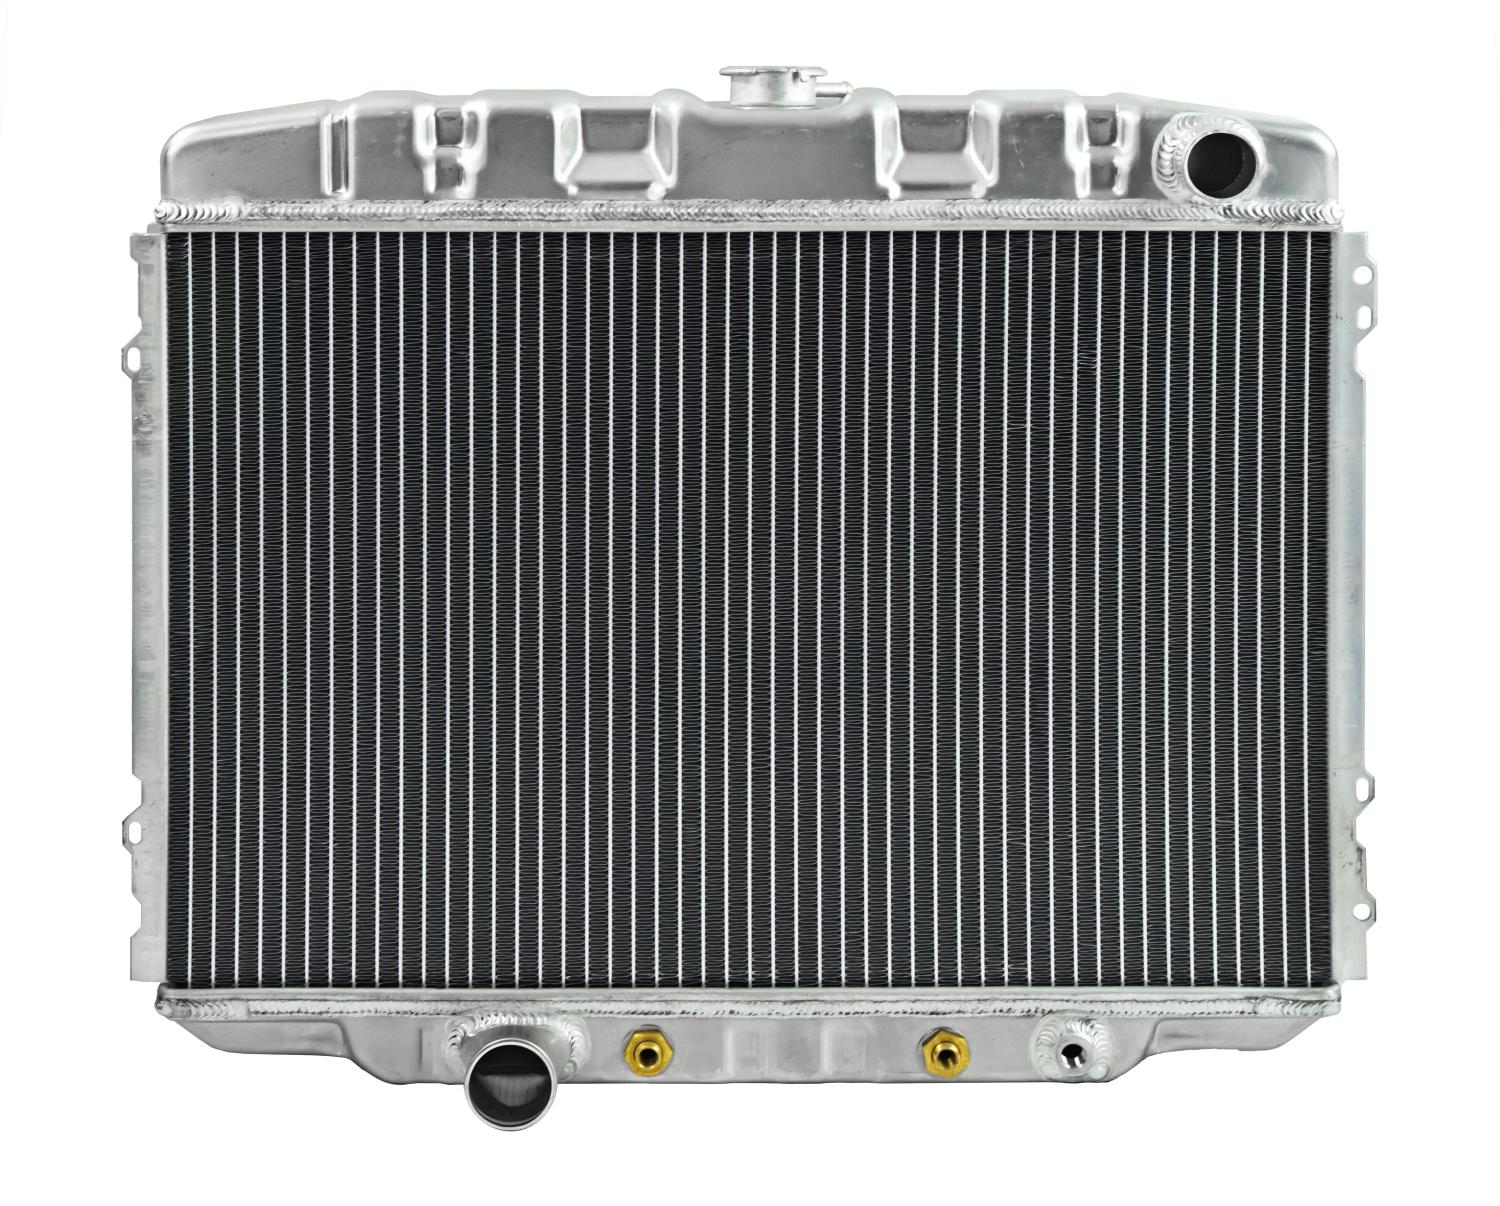 Reproduction Aluminum Radiator for 1968-1970 Ford Mustang &